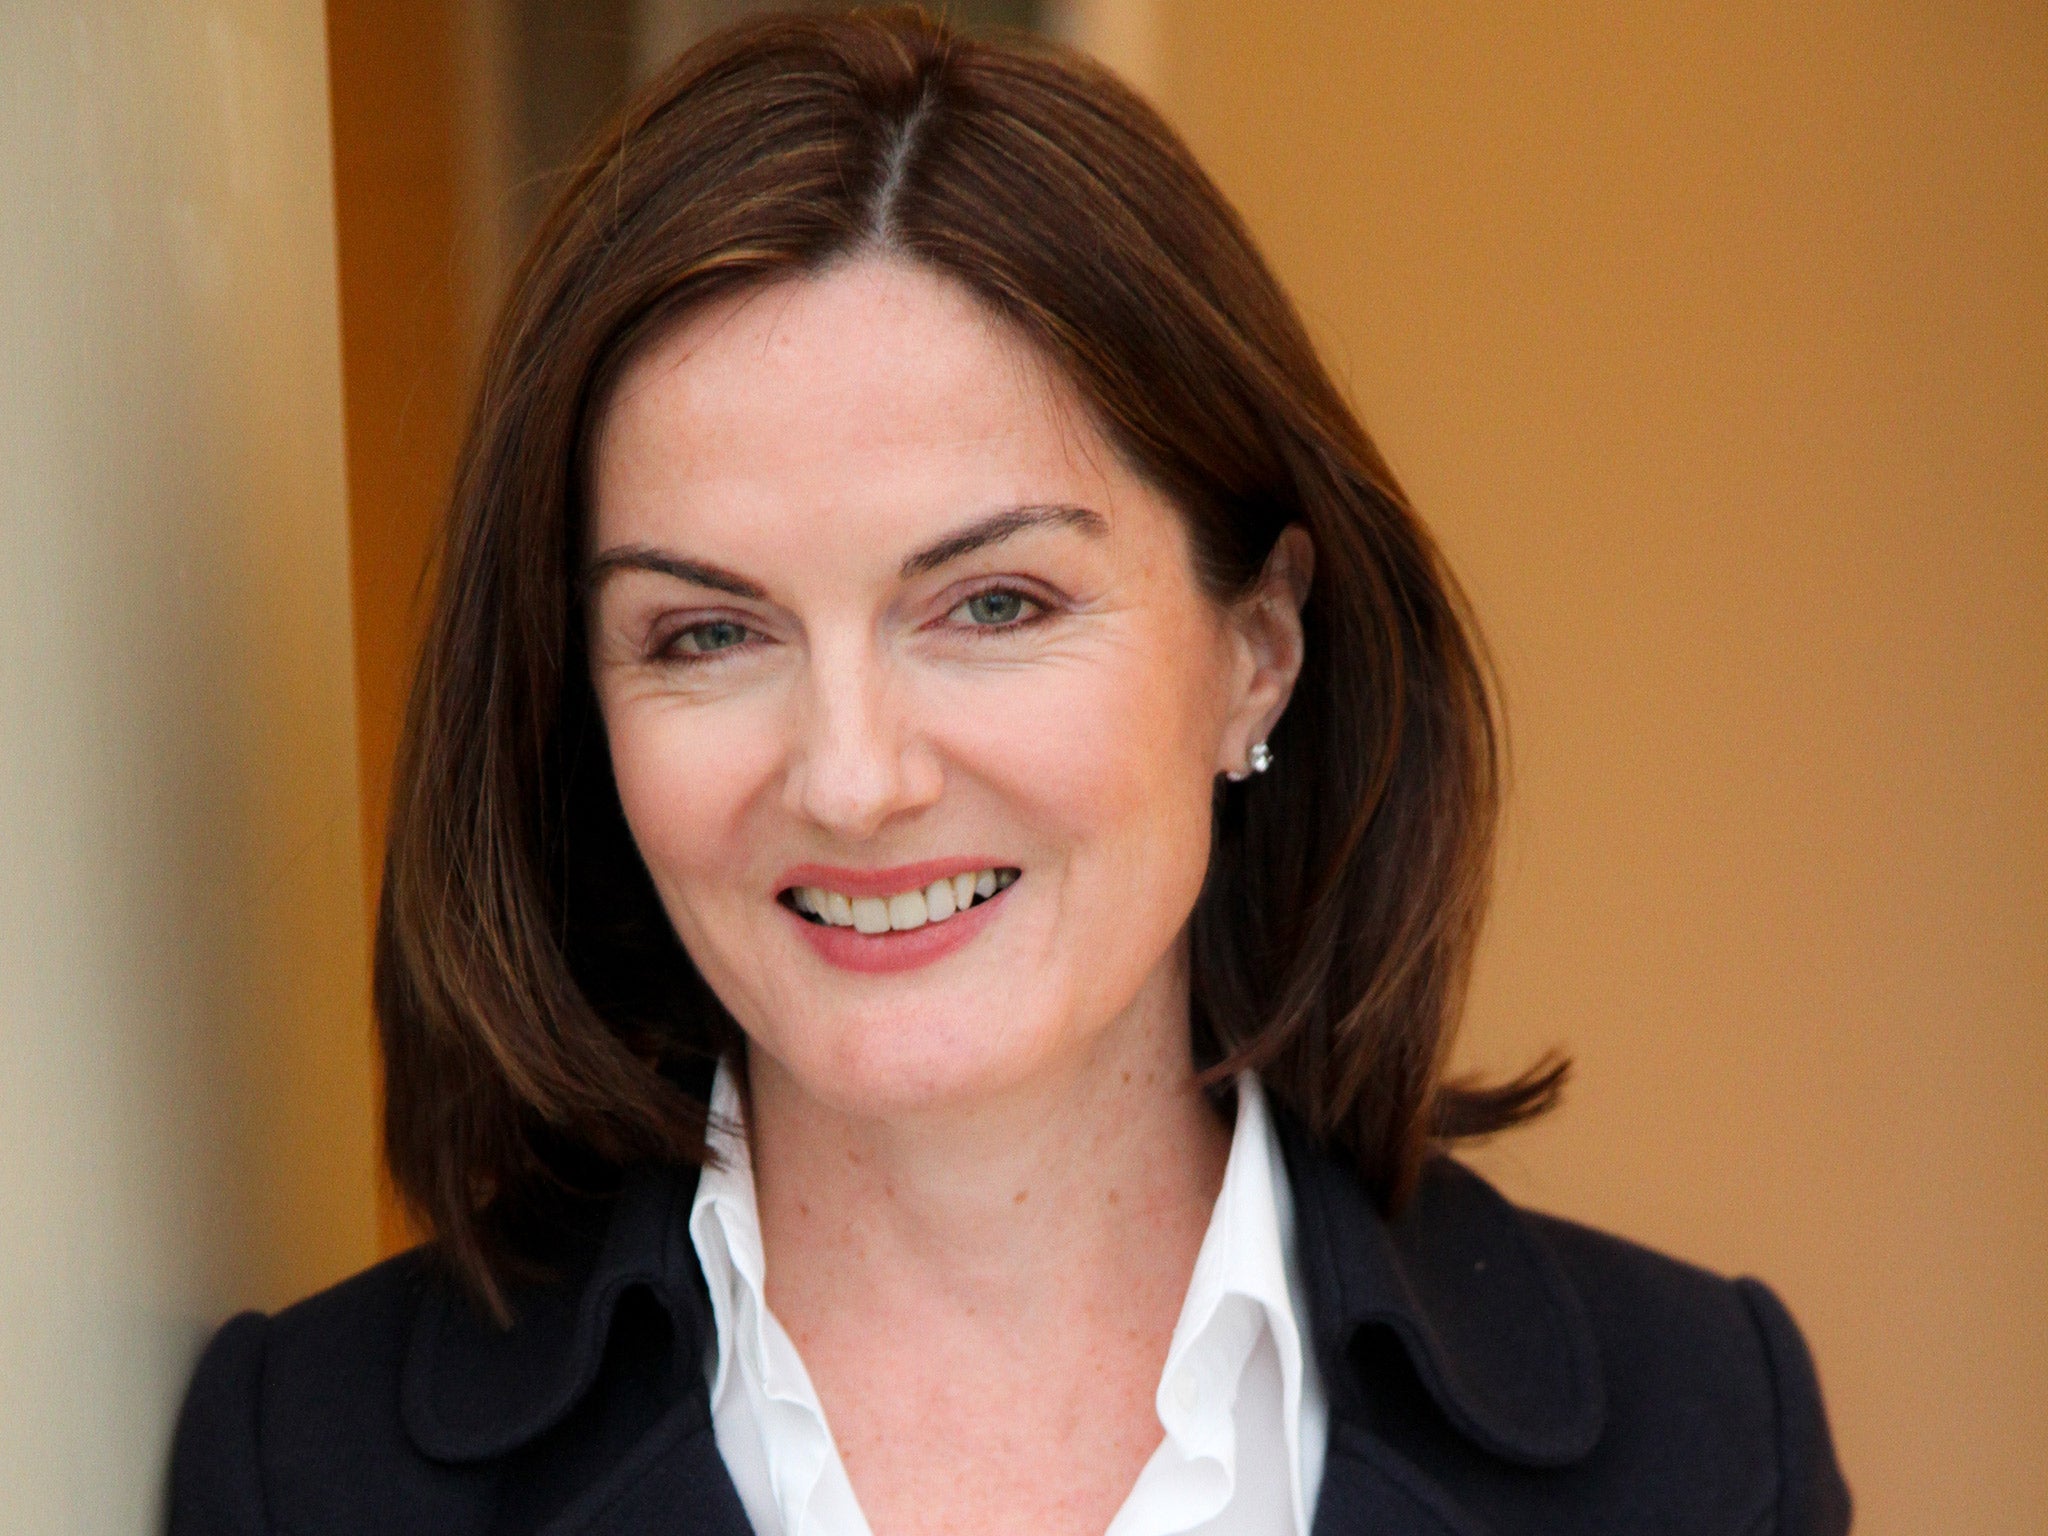 New Tory Bullying Scandal Breaks Out As Conservative Mp Lucy Allan Threatens To Sack Staff